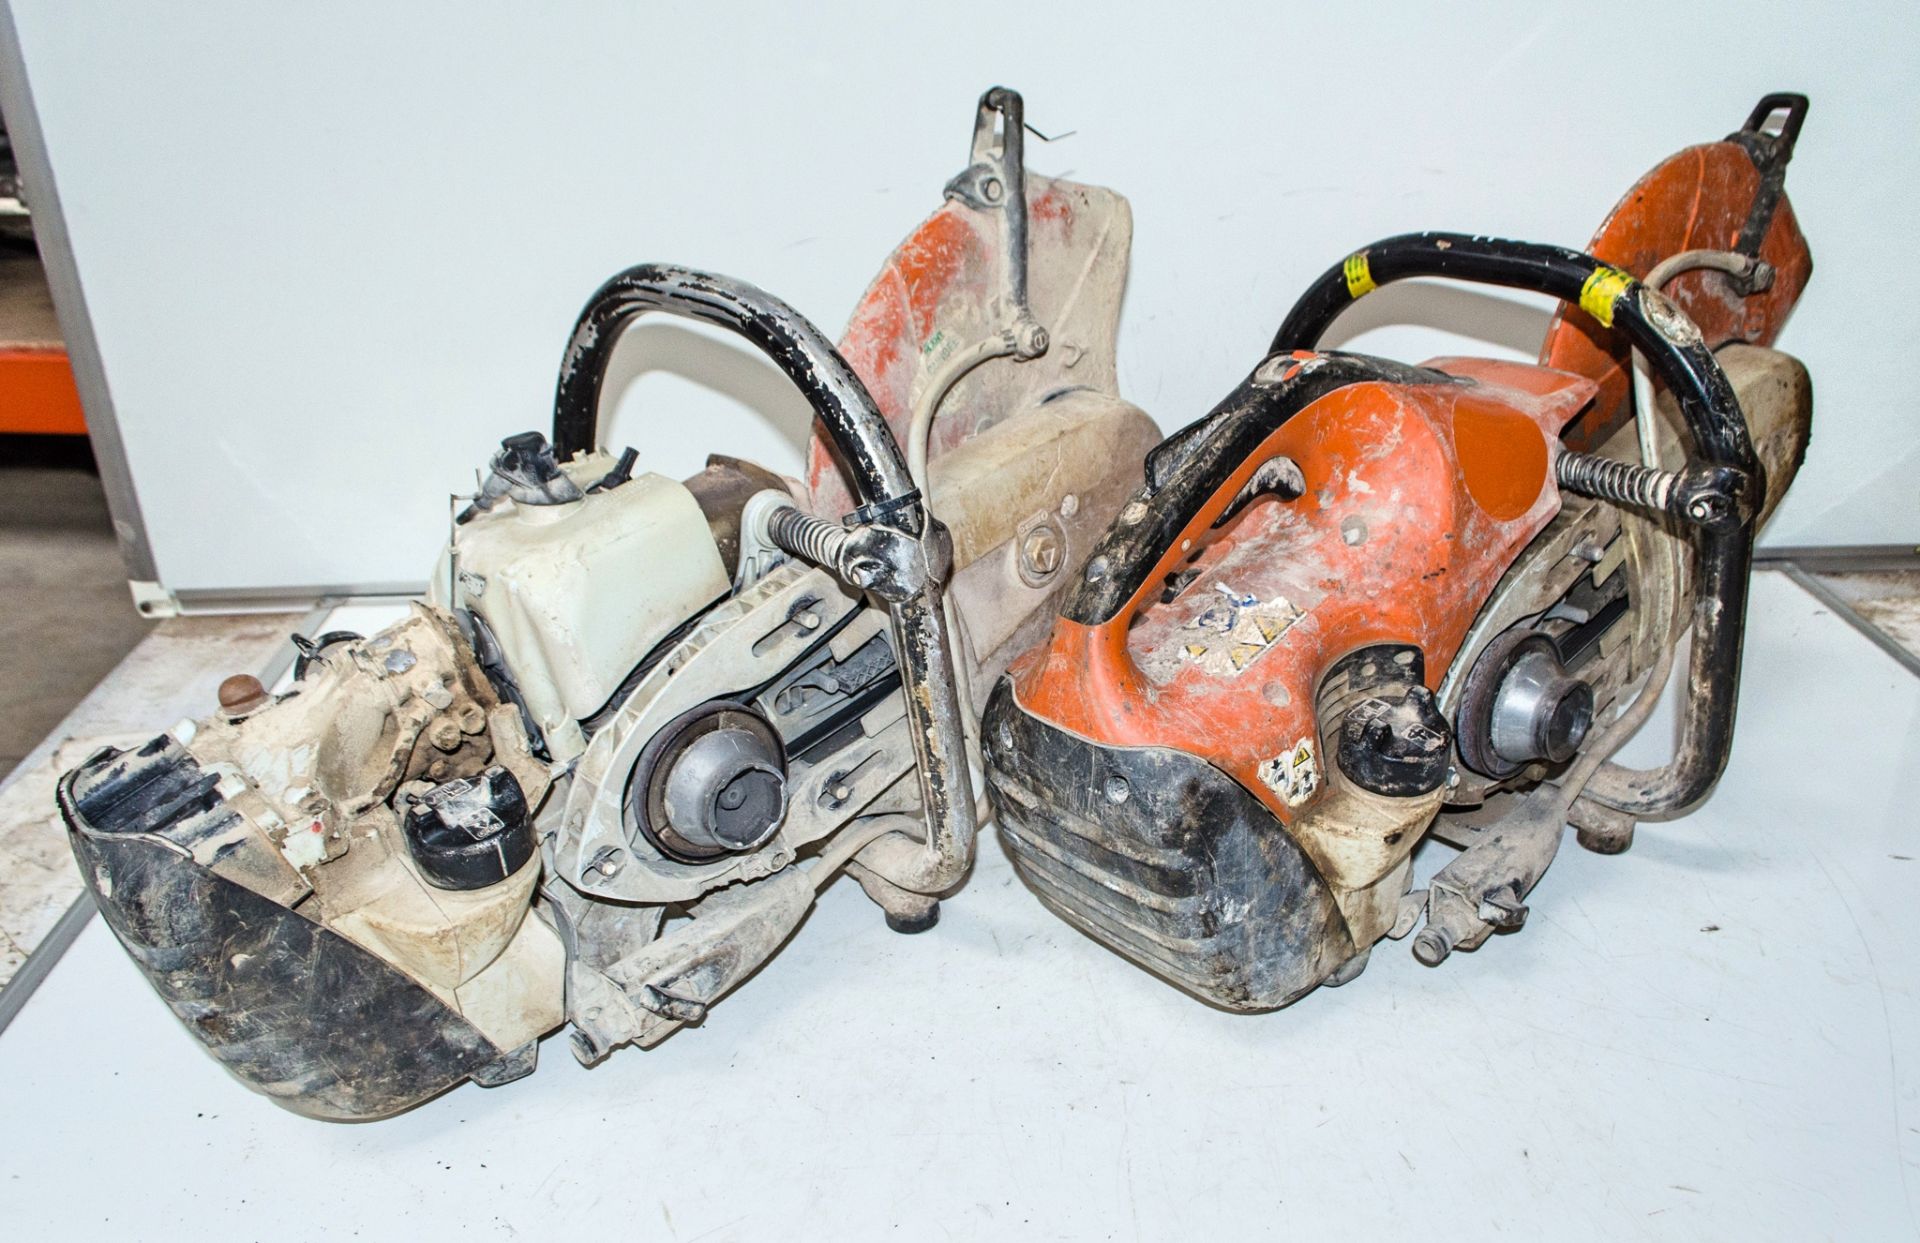 2 - Stihl TS410 petrol driven cut off saws ** Both with parts missing ** A856214, A808986 - Image 2 of 2